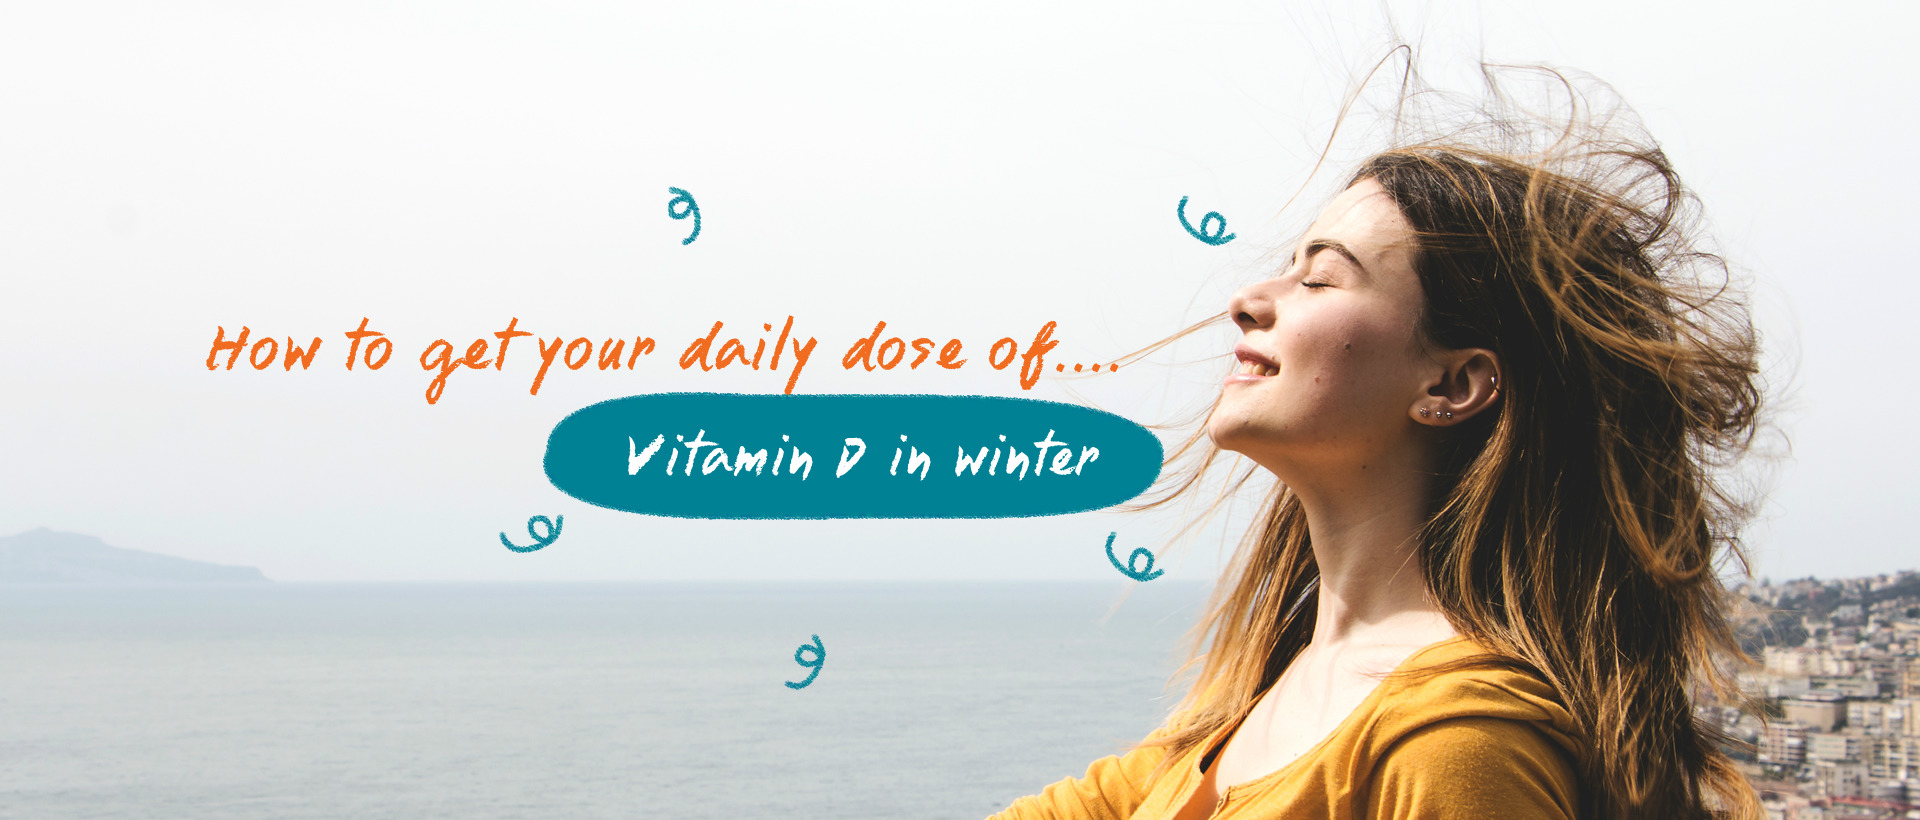 How to get your daily dose of vitamin D in winter